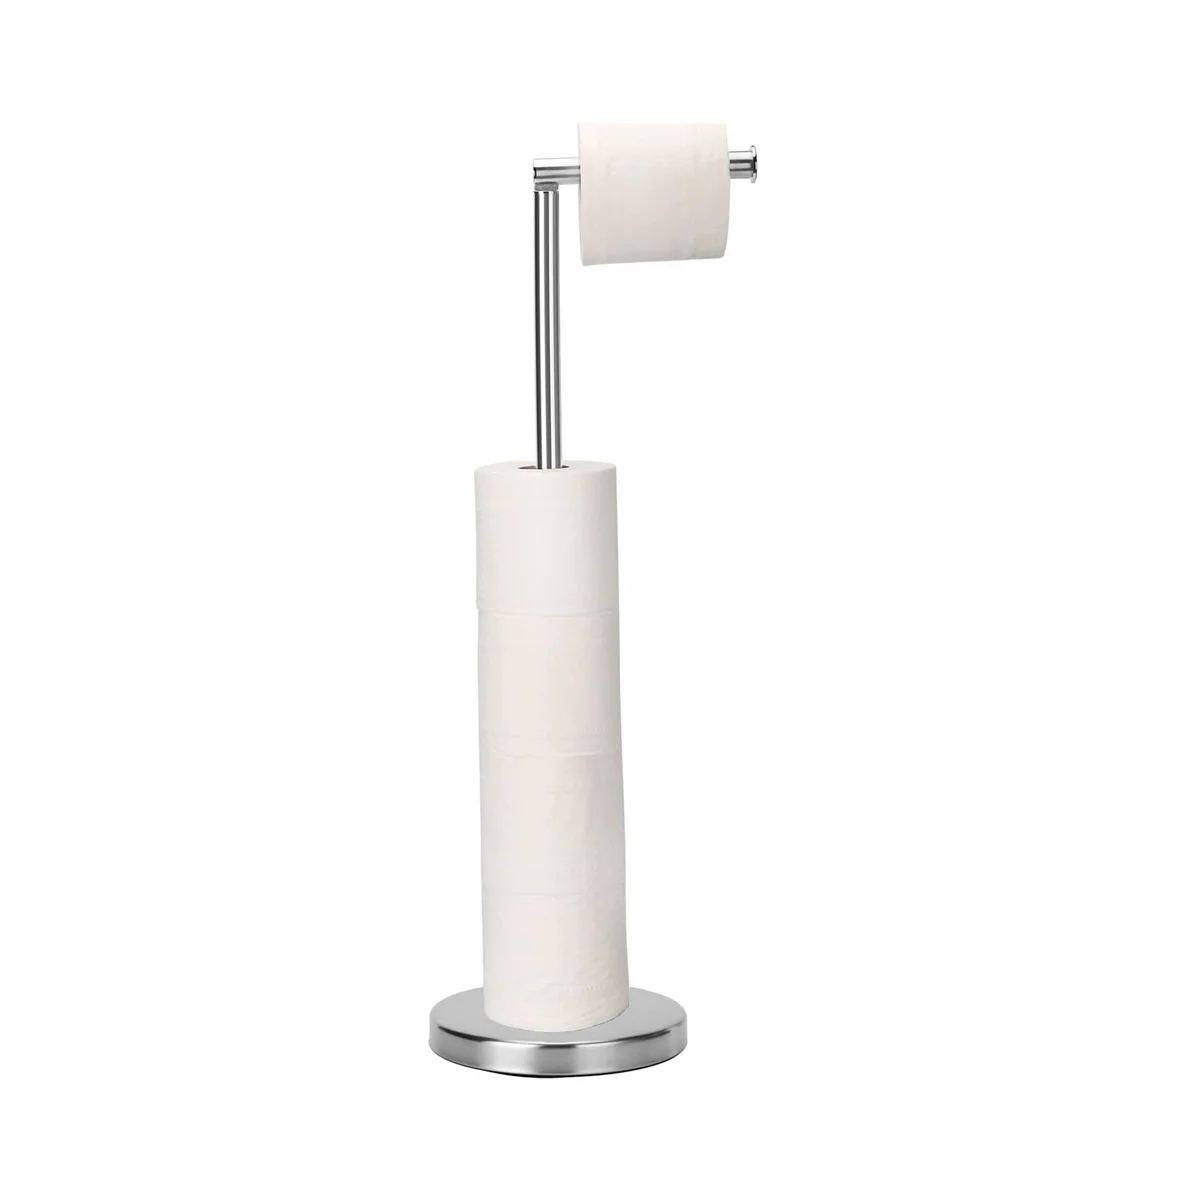 

Toilet Paper Holder, Free Standing Toilet Paper Holder Stand with Reserve for 4 Spare Rolls, Sturdy Base